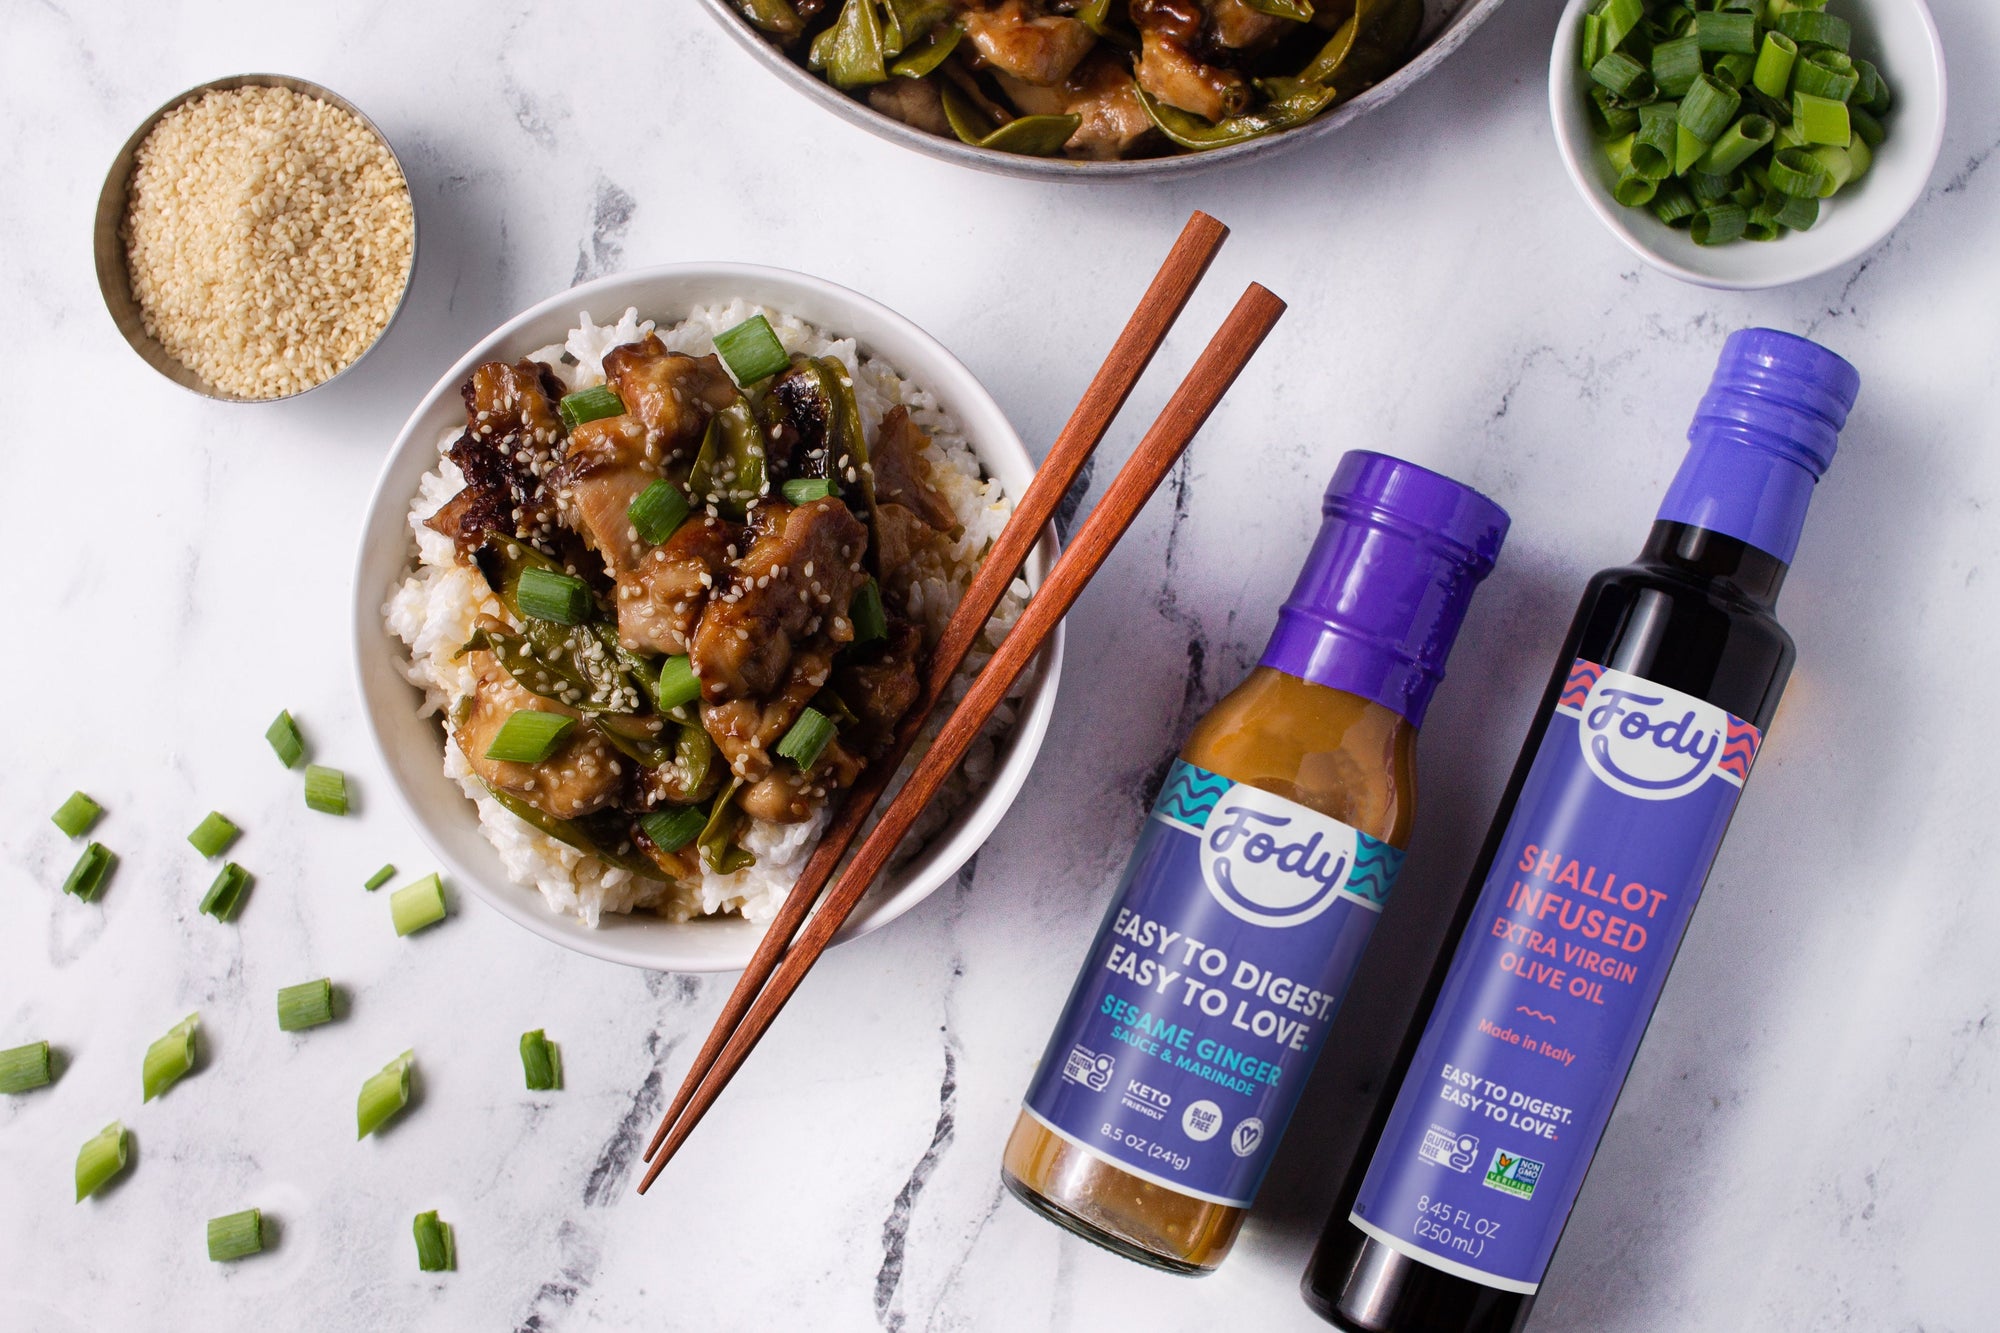 Fody's Low FODMAP Sesame Ginger Chicken with Coconut Rice next to Fody Olive Oil and Fody Sesame Ginger Sauce